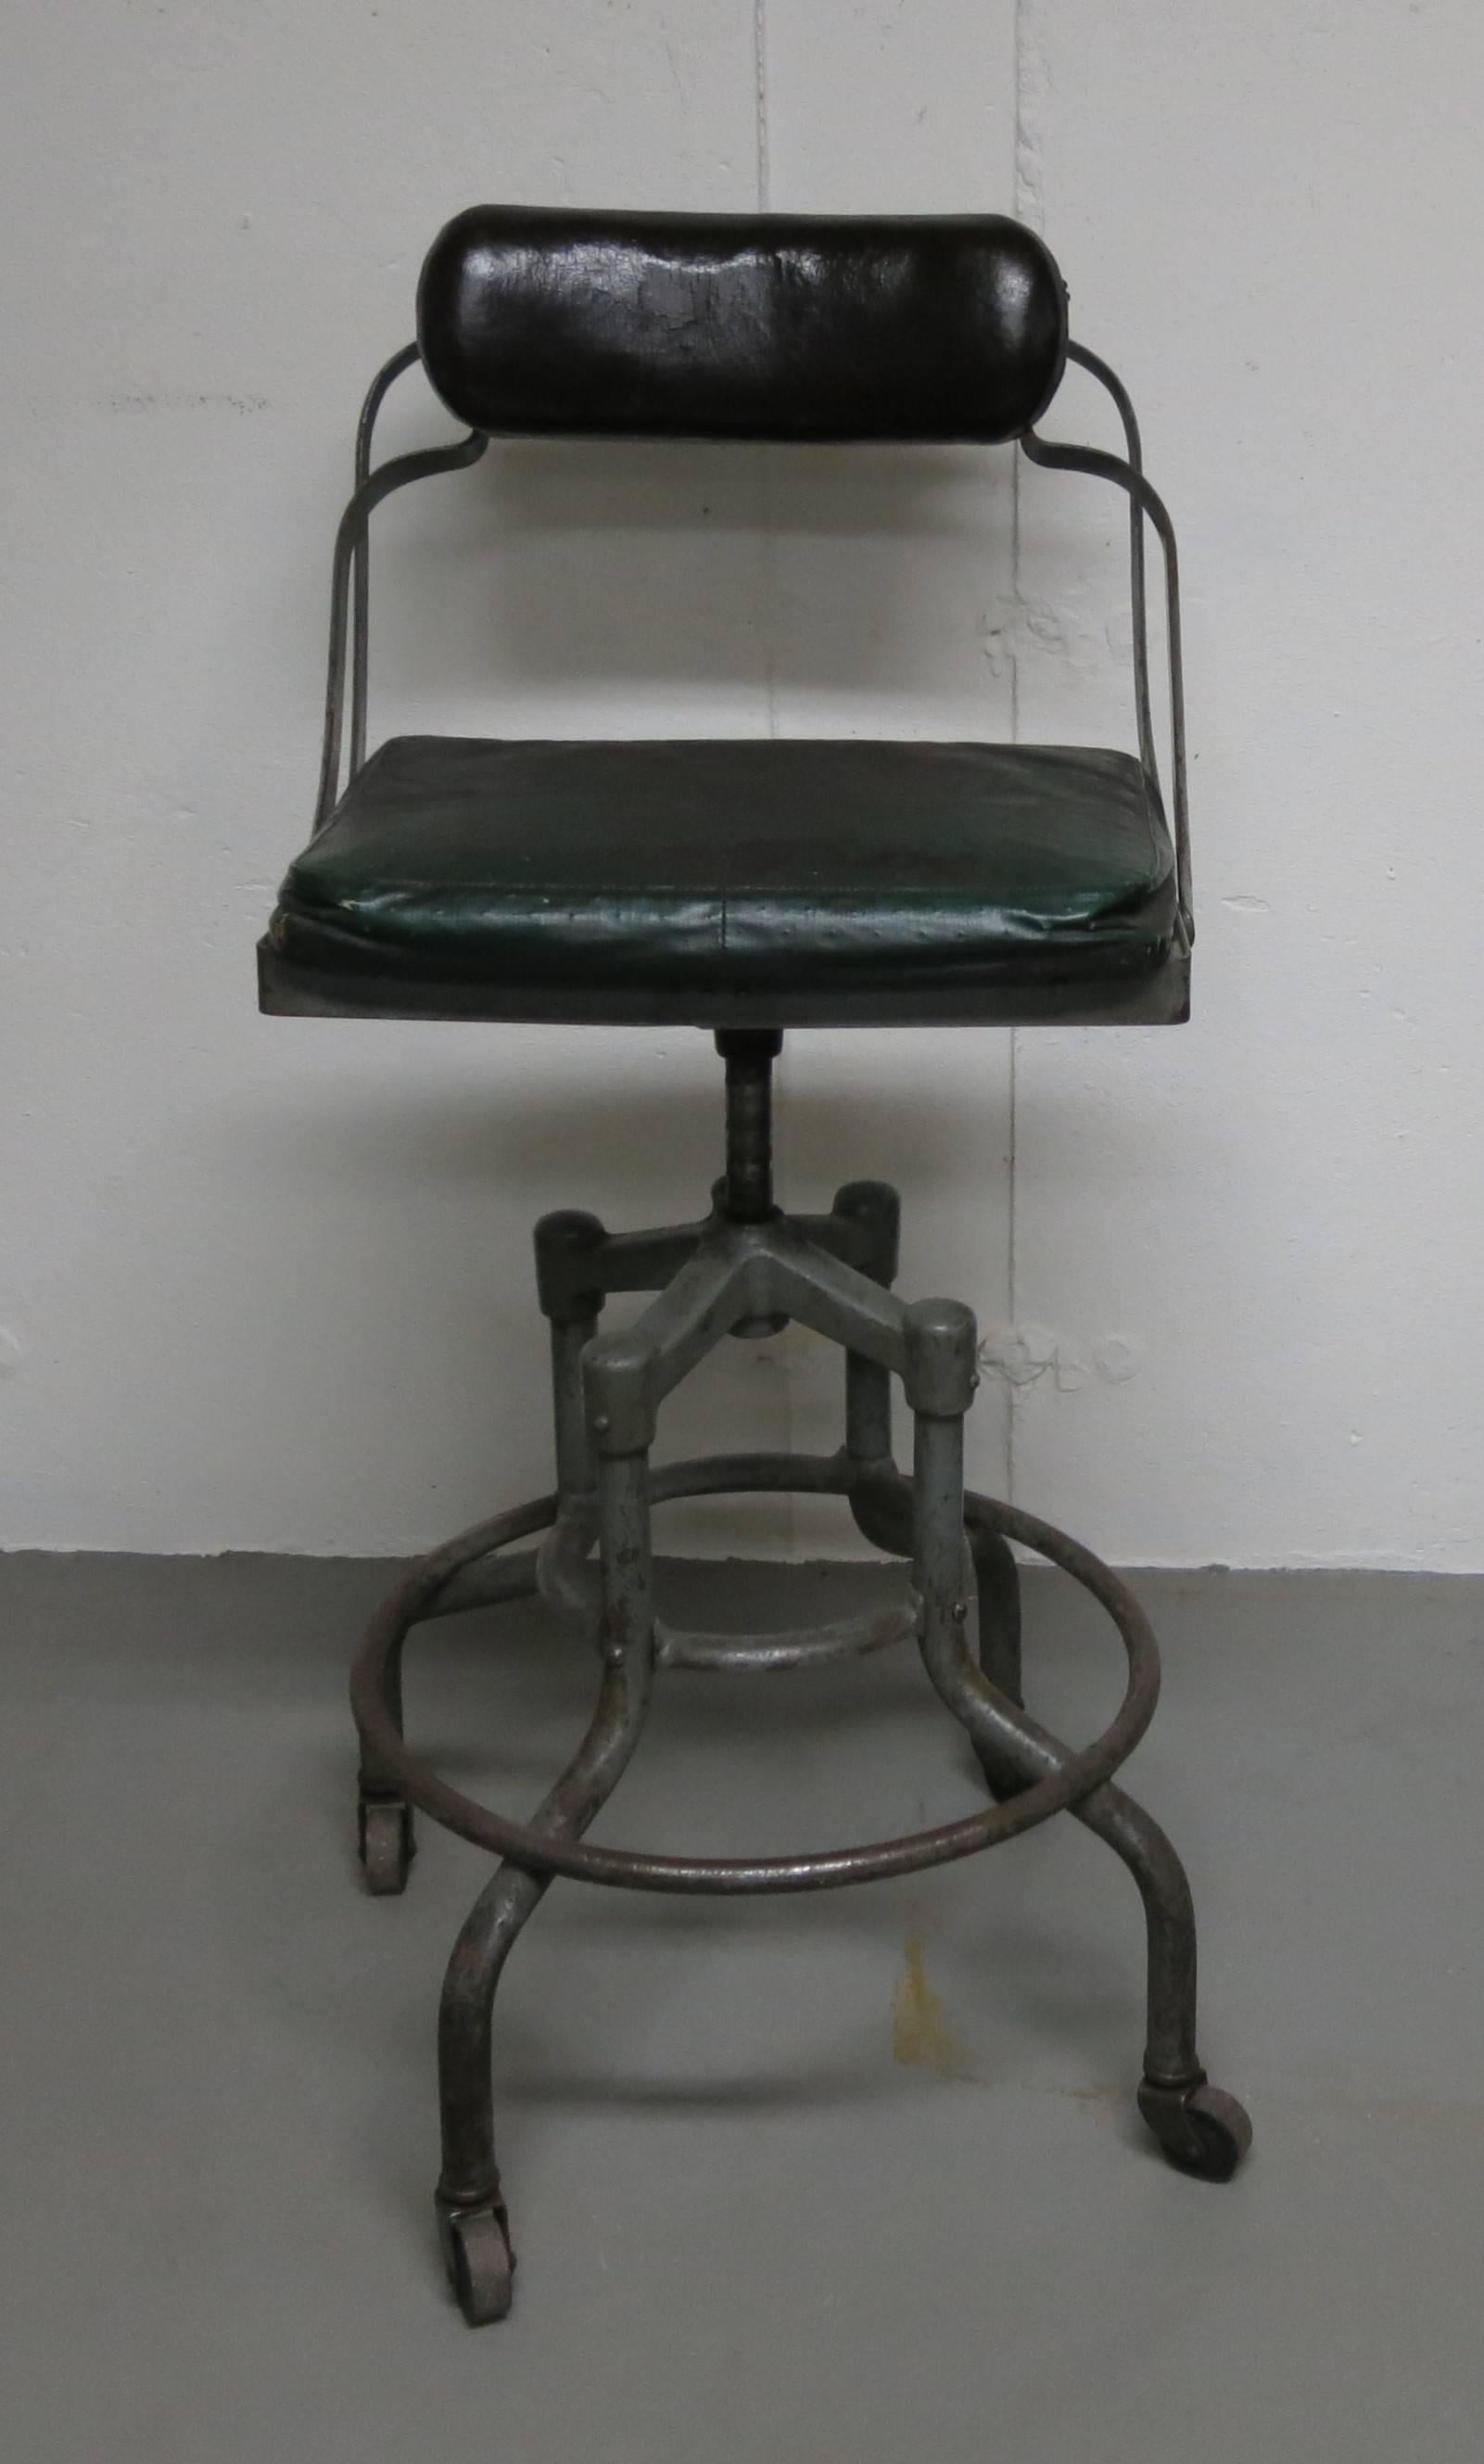 Nicely worn Fritz Cross Industrial chair or stool. Measure: The seat raises 25